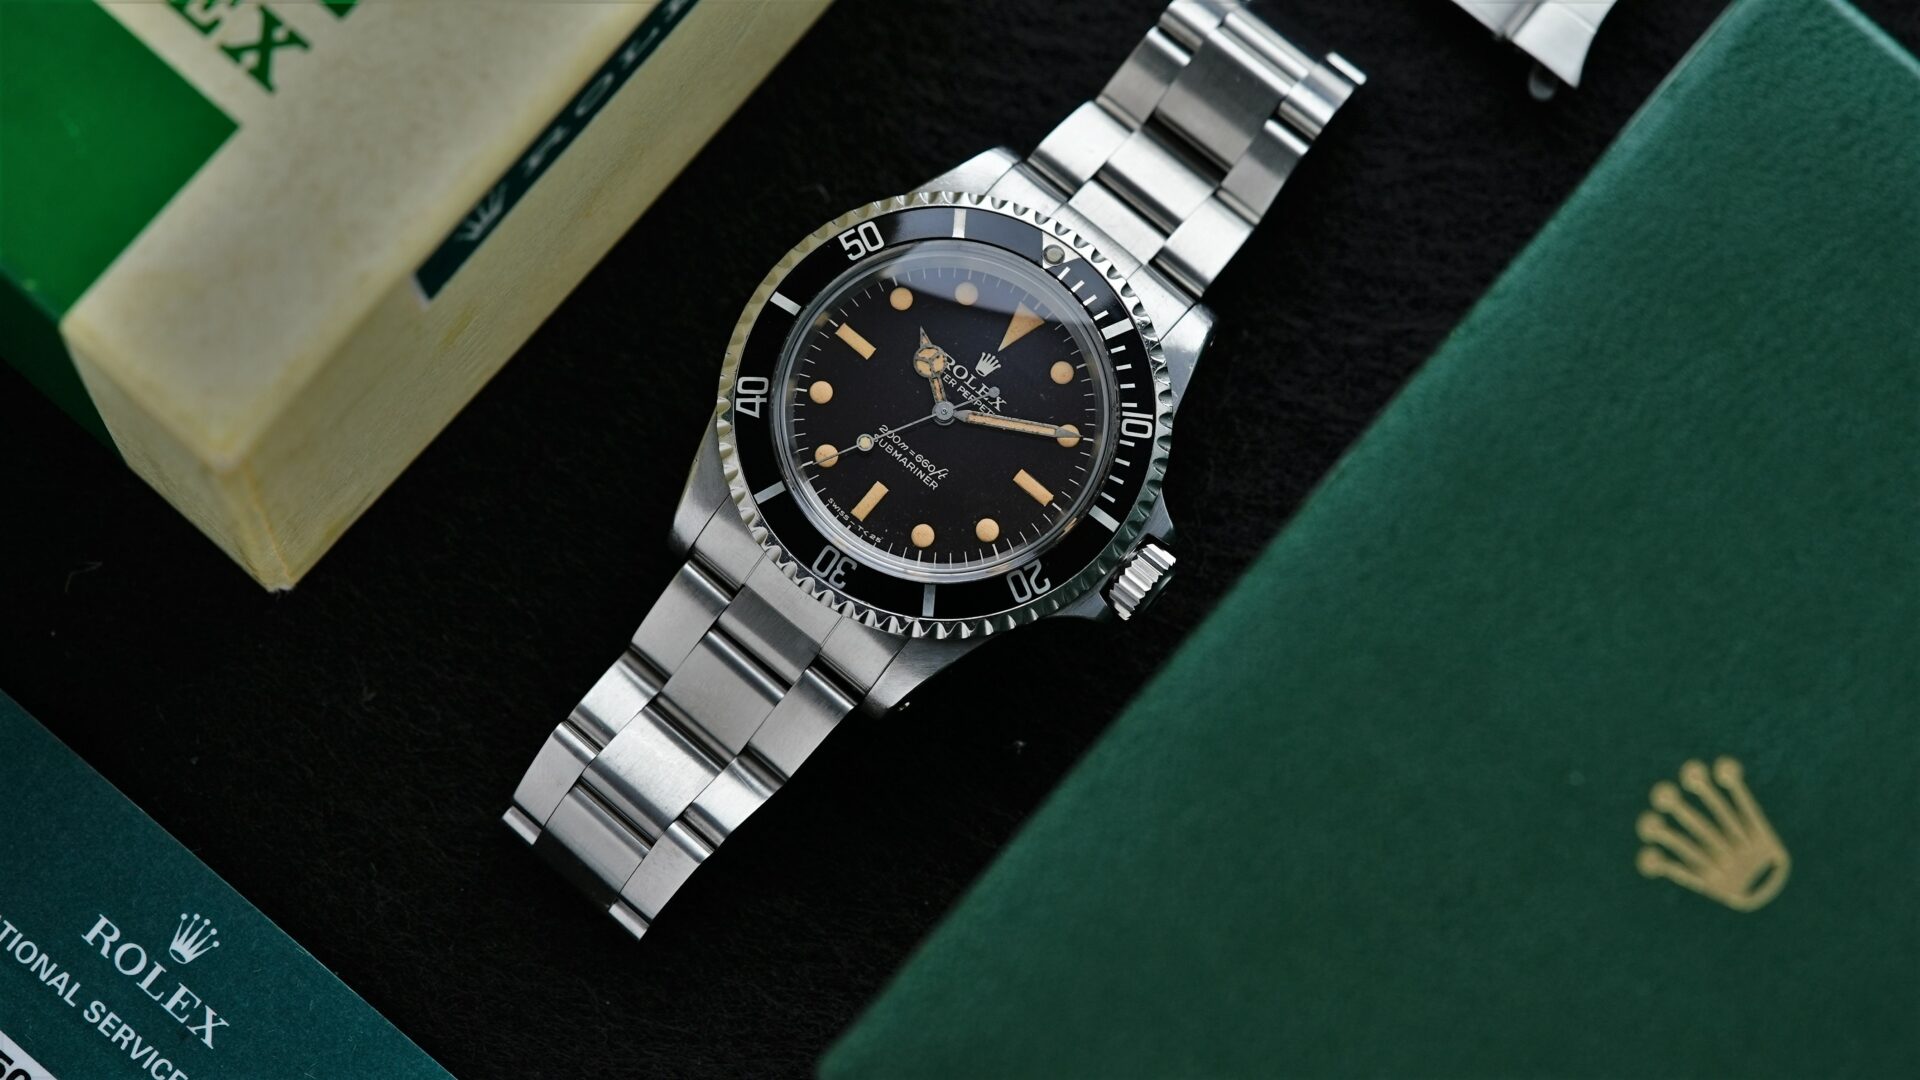 Rolex Submariner 5513 Bart Simpson Tropical Dial Original Patina Unpolished watch setting beside box and papers.